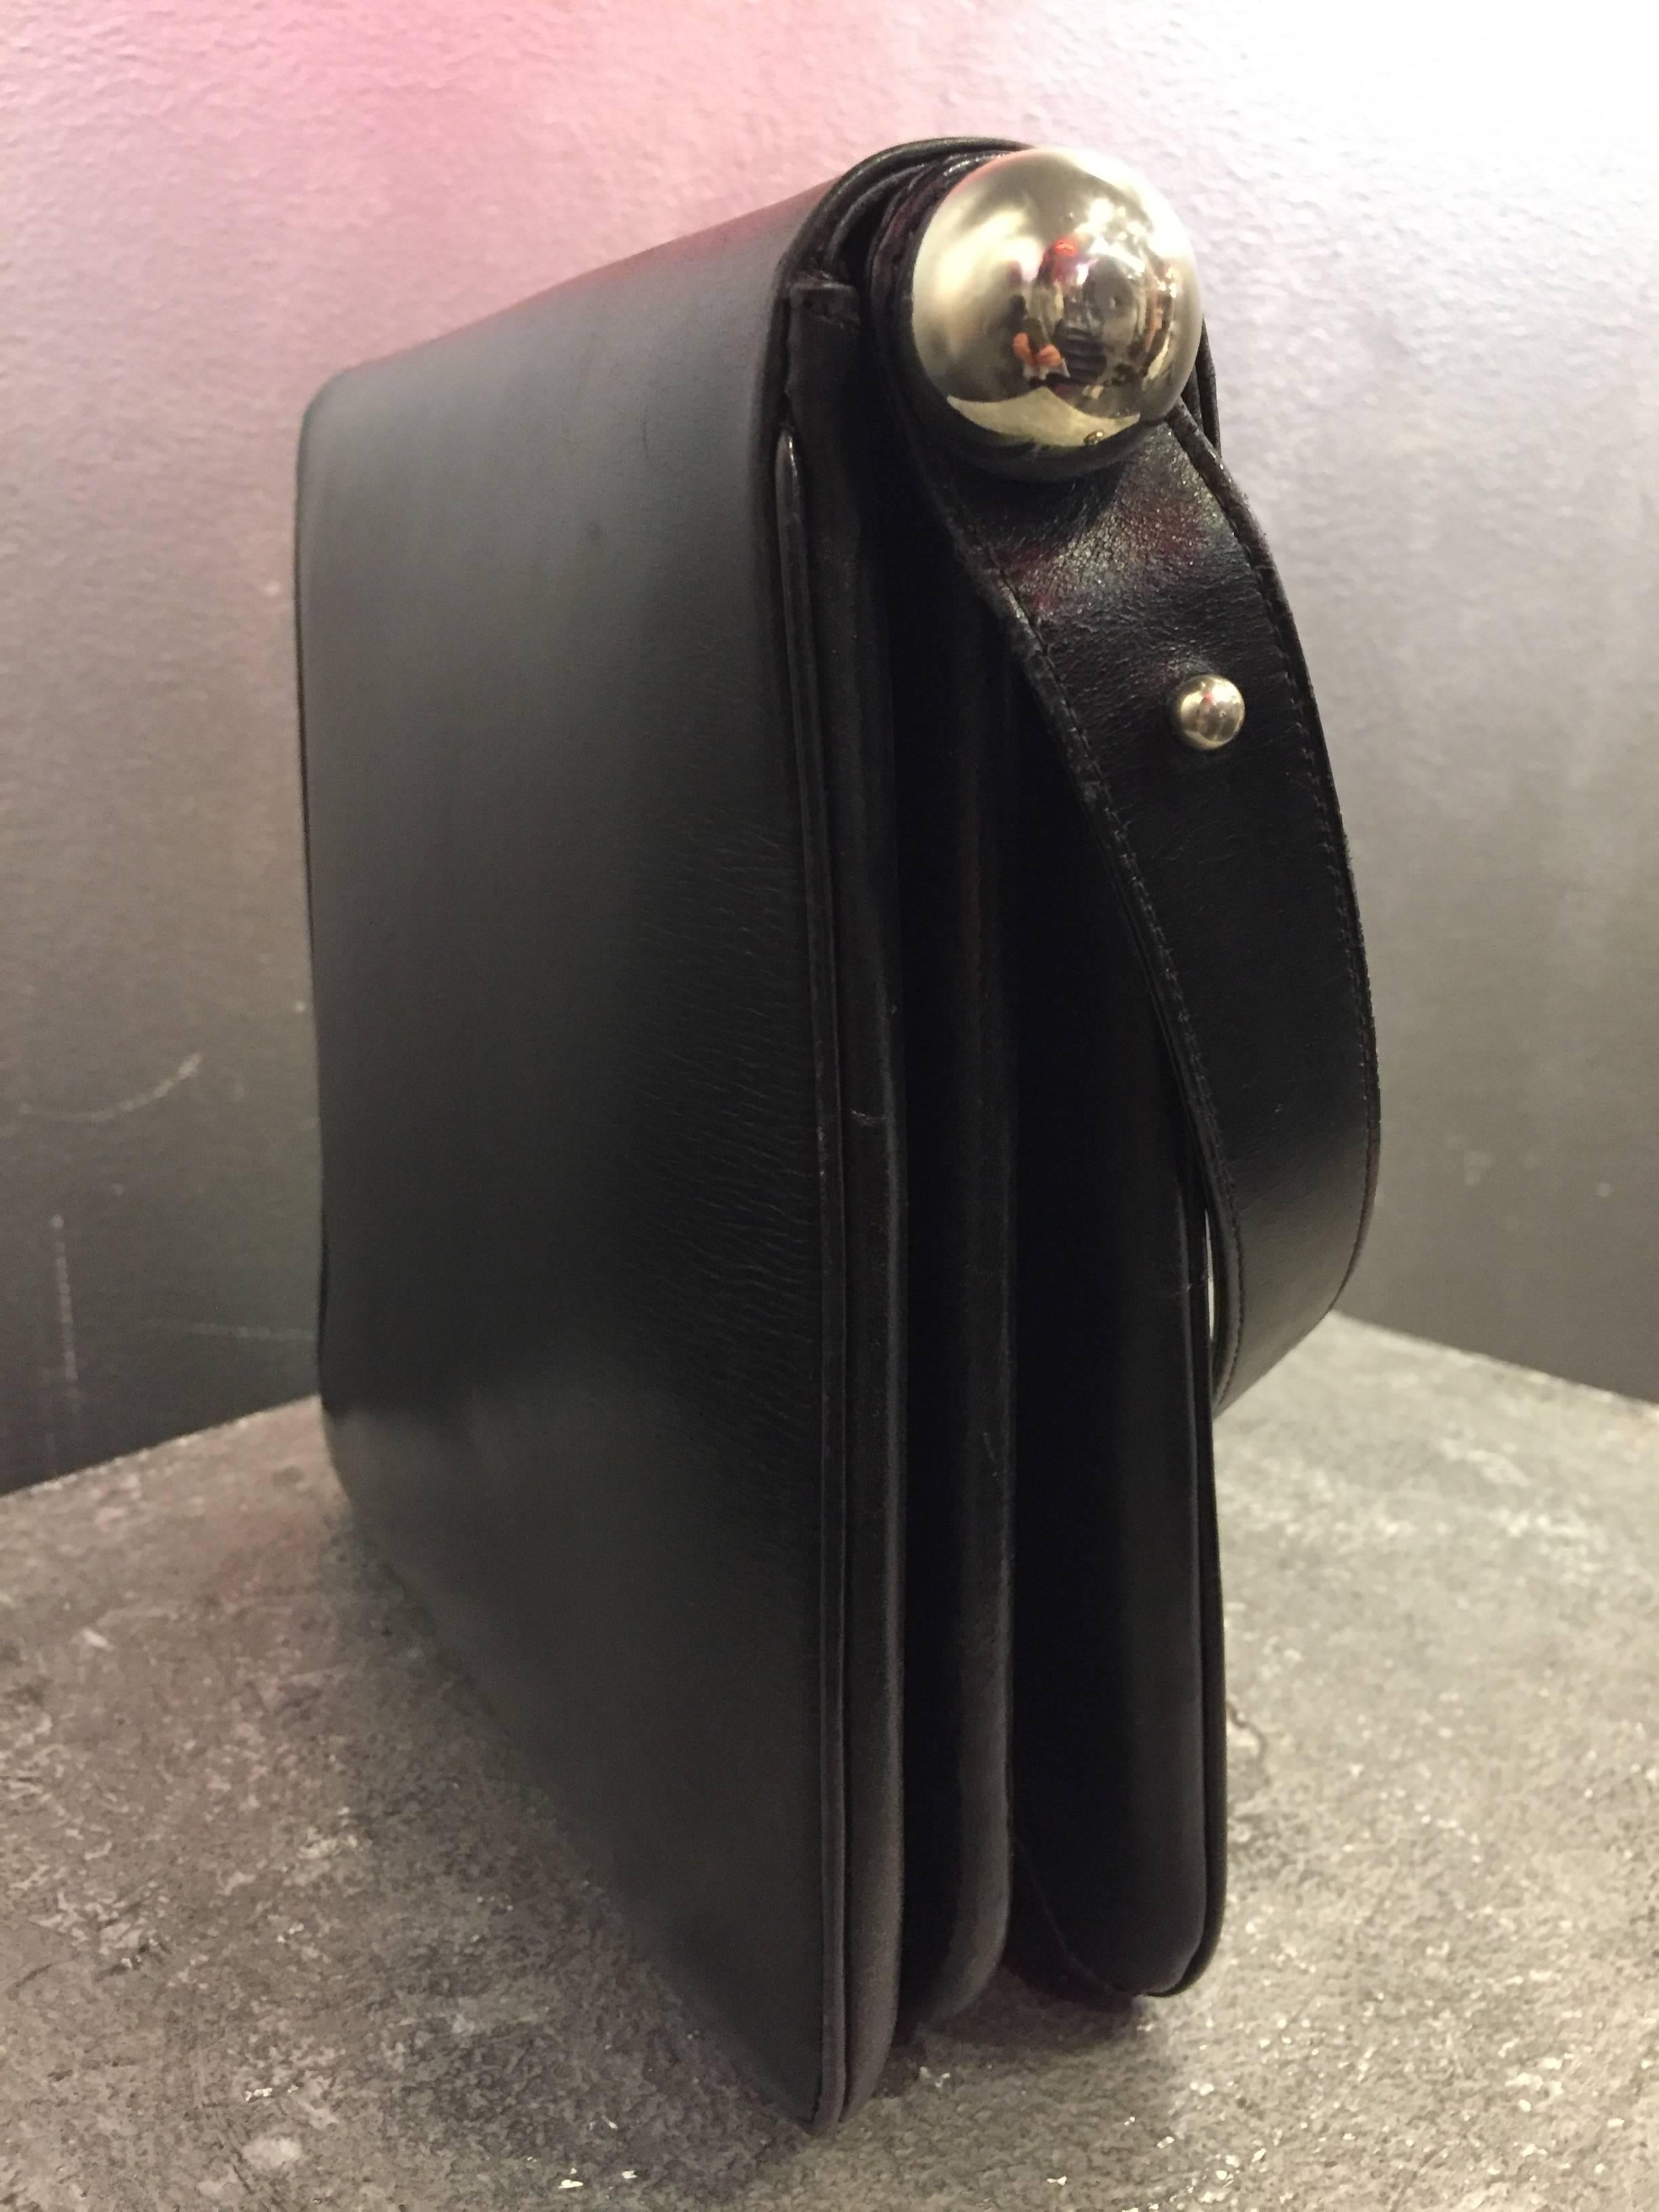 A pristine 1960s high-quality mod Saks Fifth Avenue black calf skin shoulder bag with adjustable--to double length--strap.  Large rectangular pull tab closure.  Chrome ball detail and two accordion-style expandable compartments.